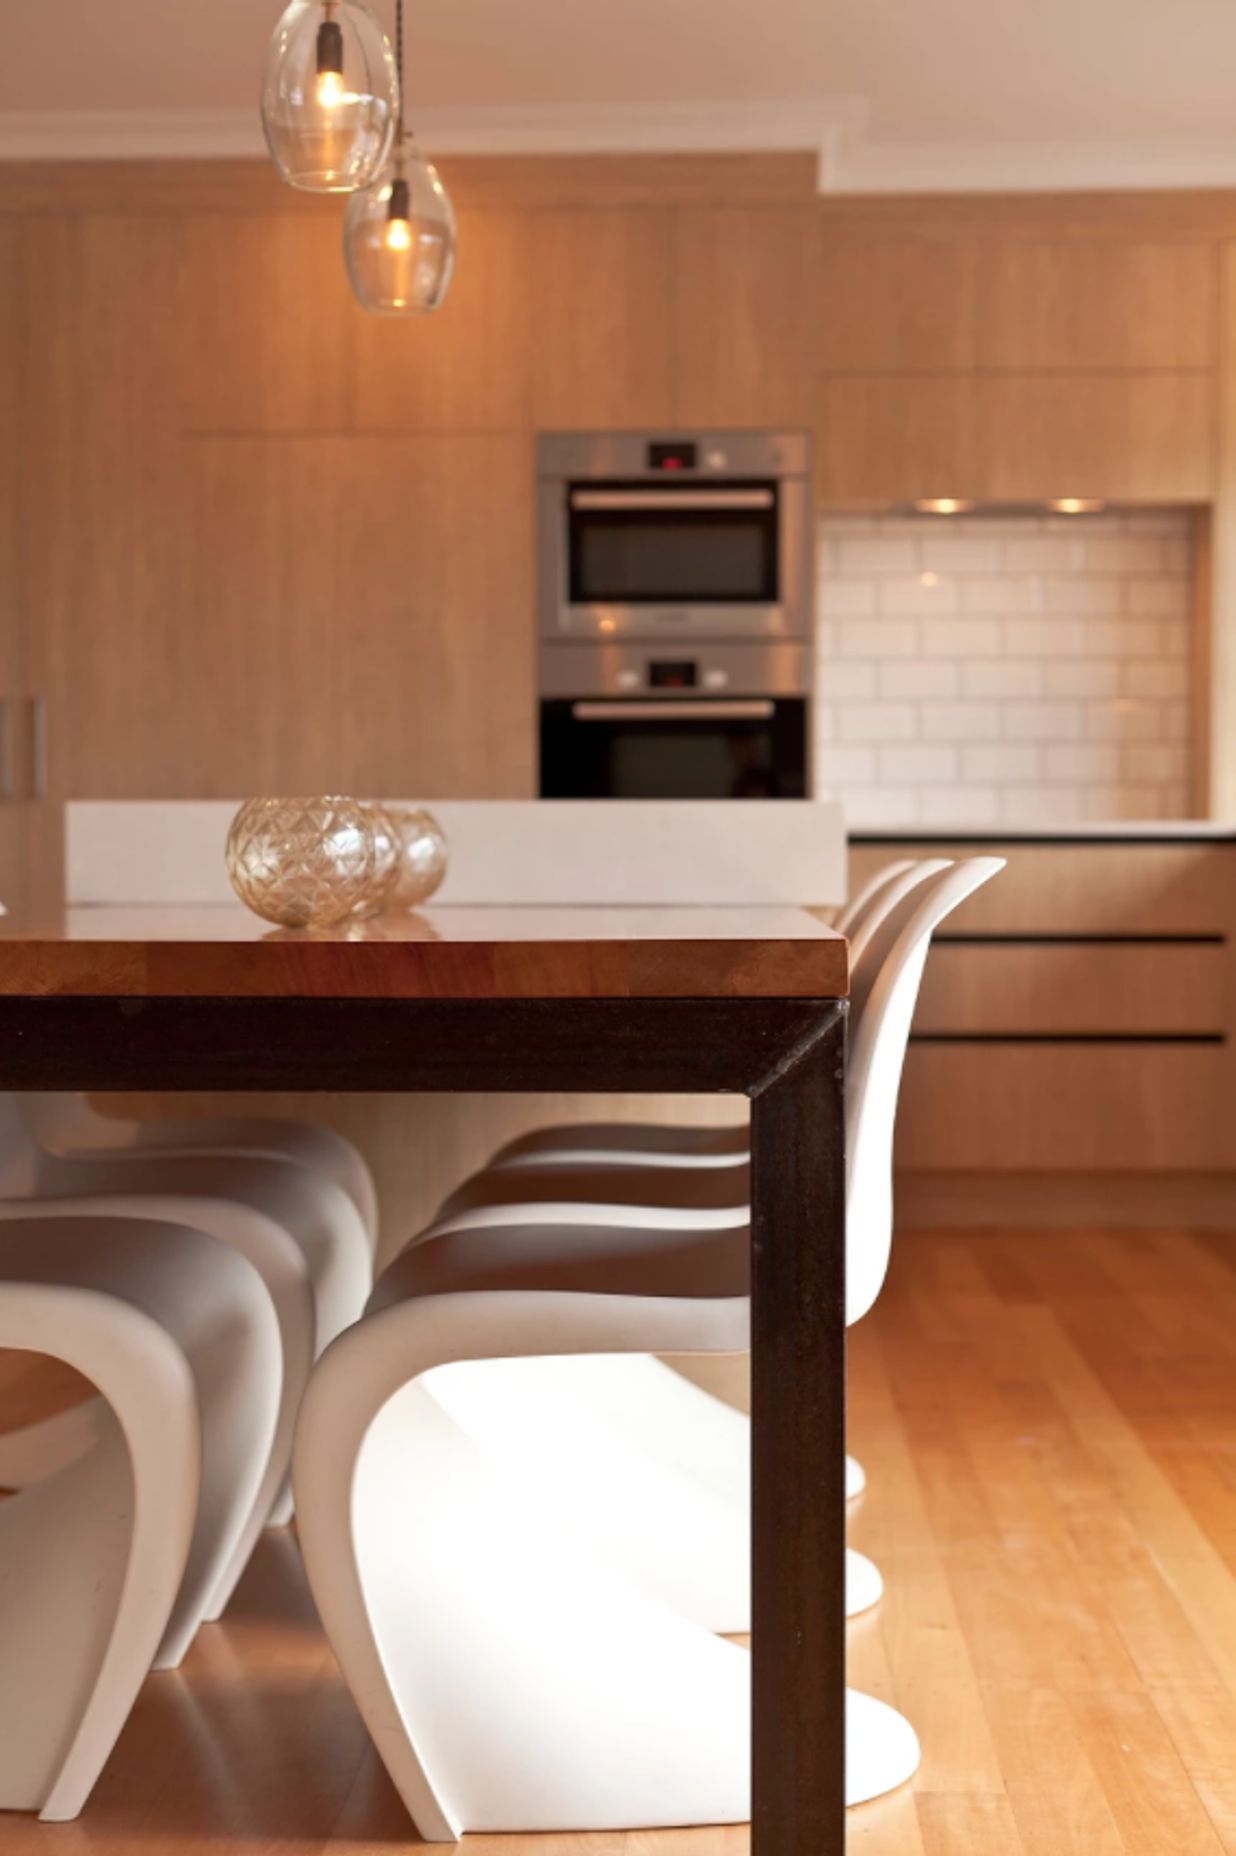 In this home the integrated dining serves as a secondary informal dining area for the family.